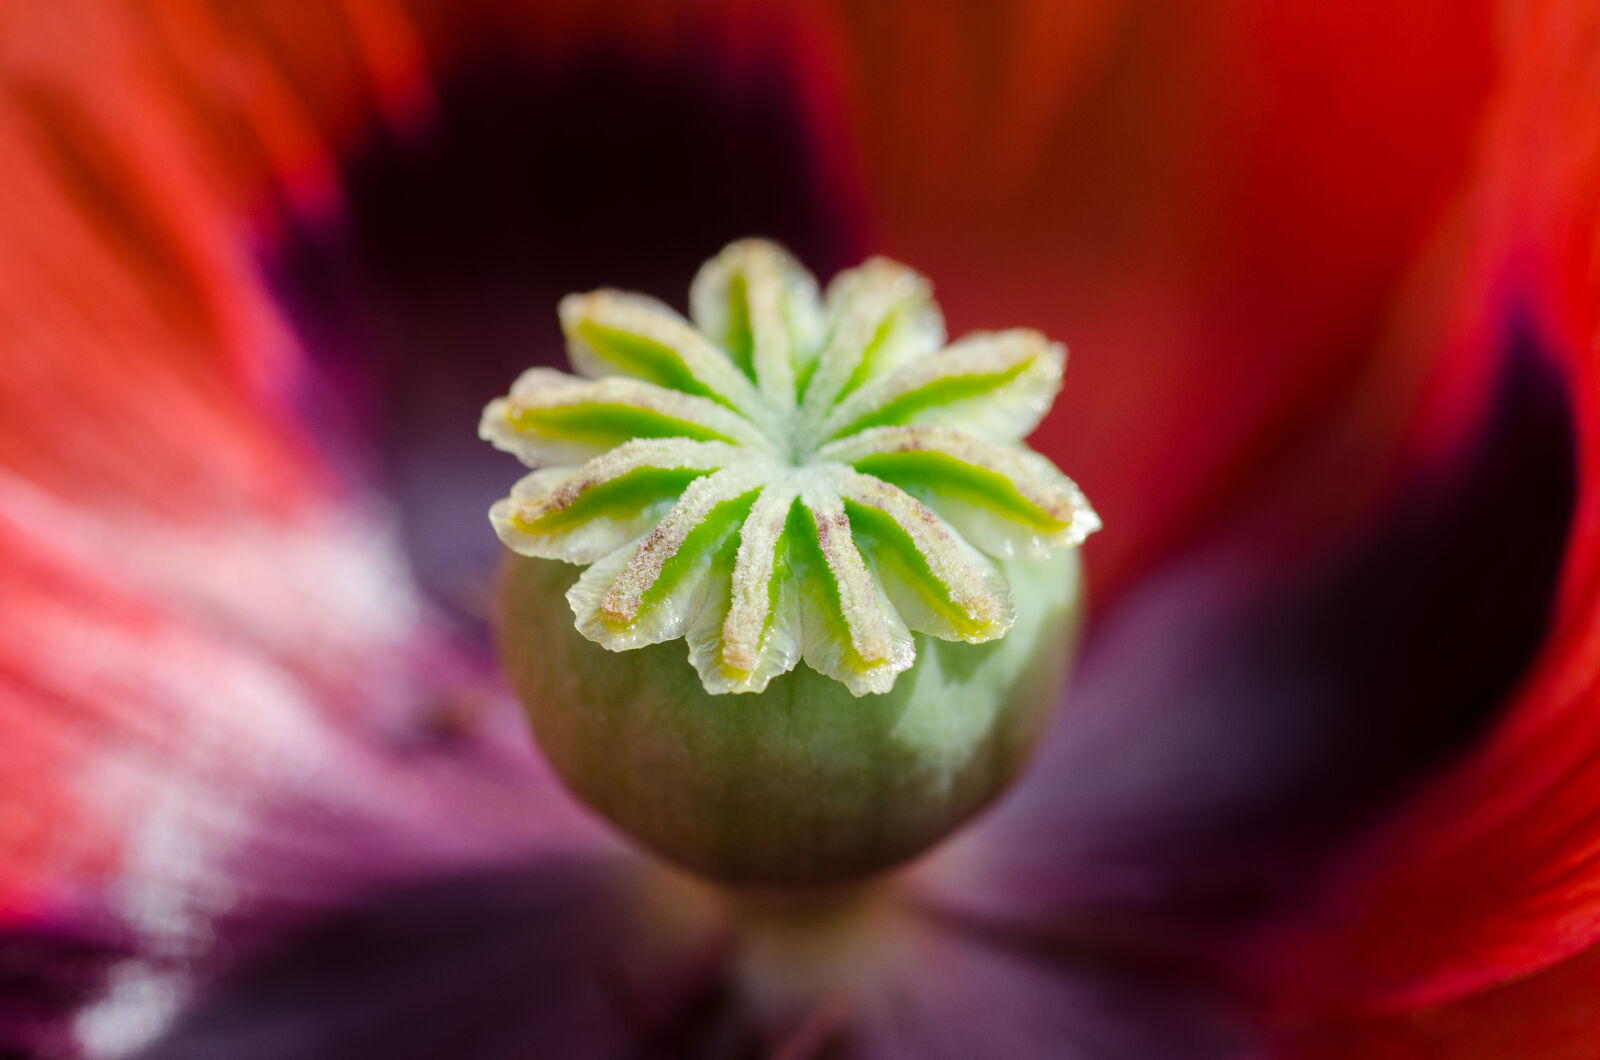 AF Micro-Nikkor 55mm f/2.8 sample photo. Nature, colorful, flower, poppy photography